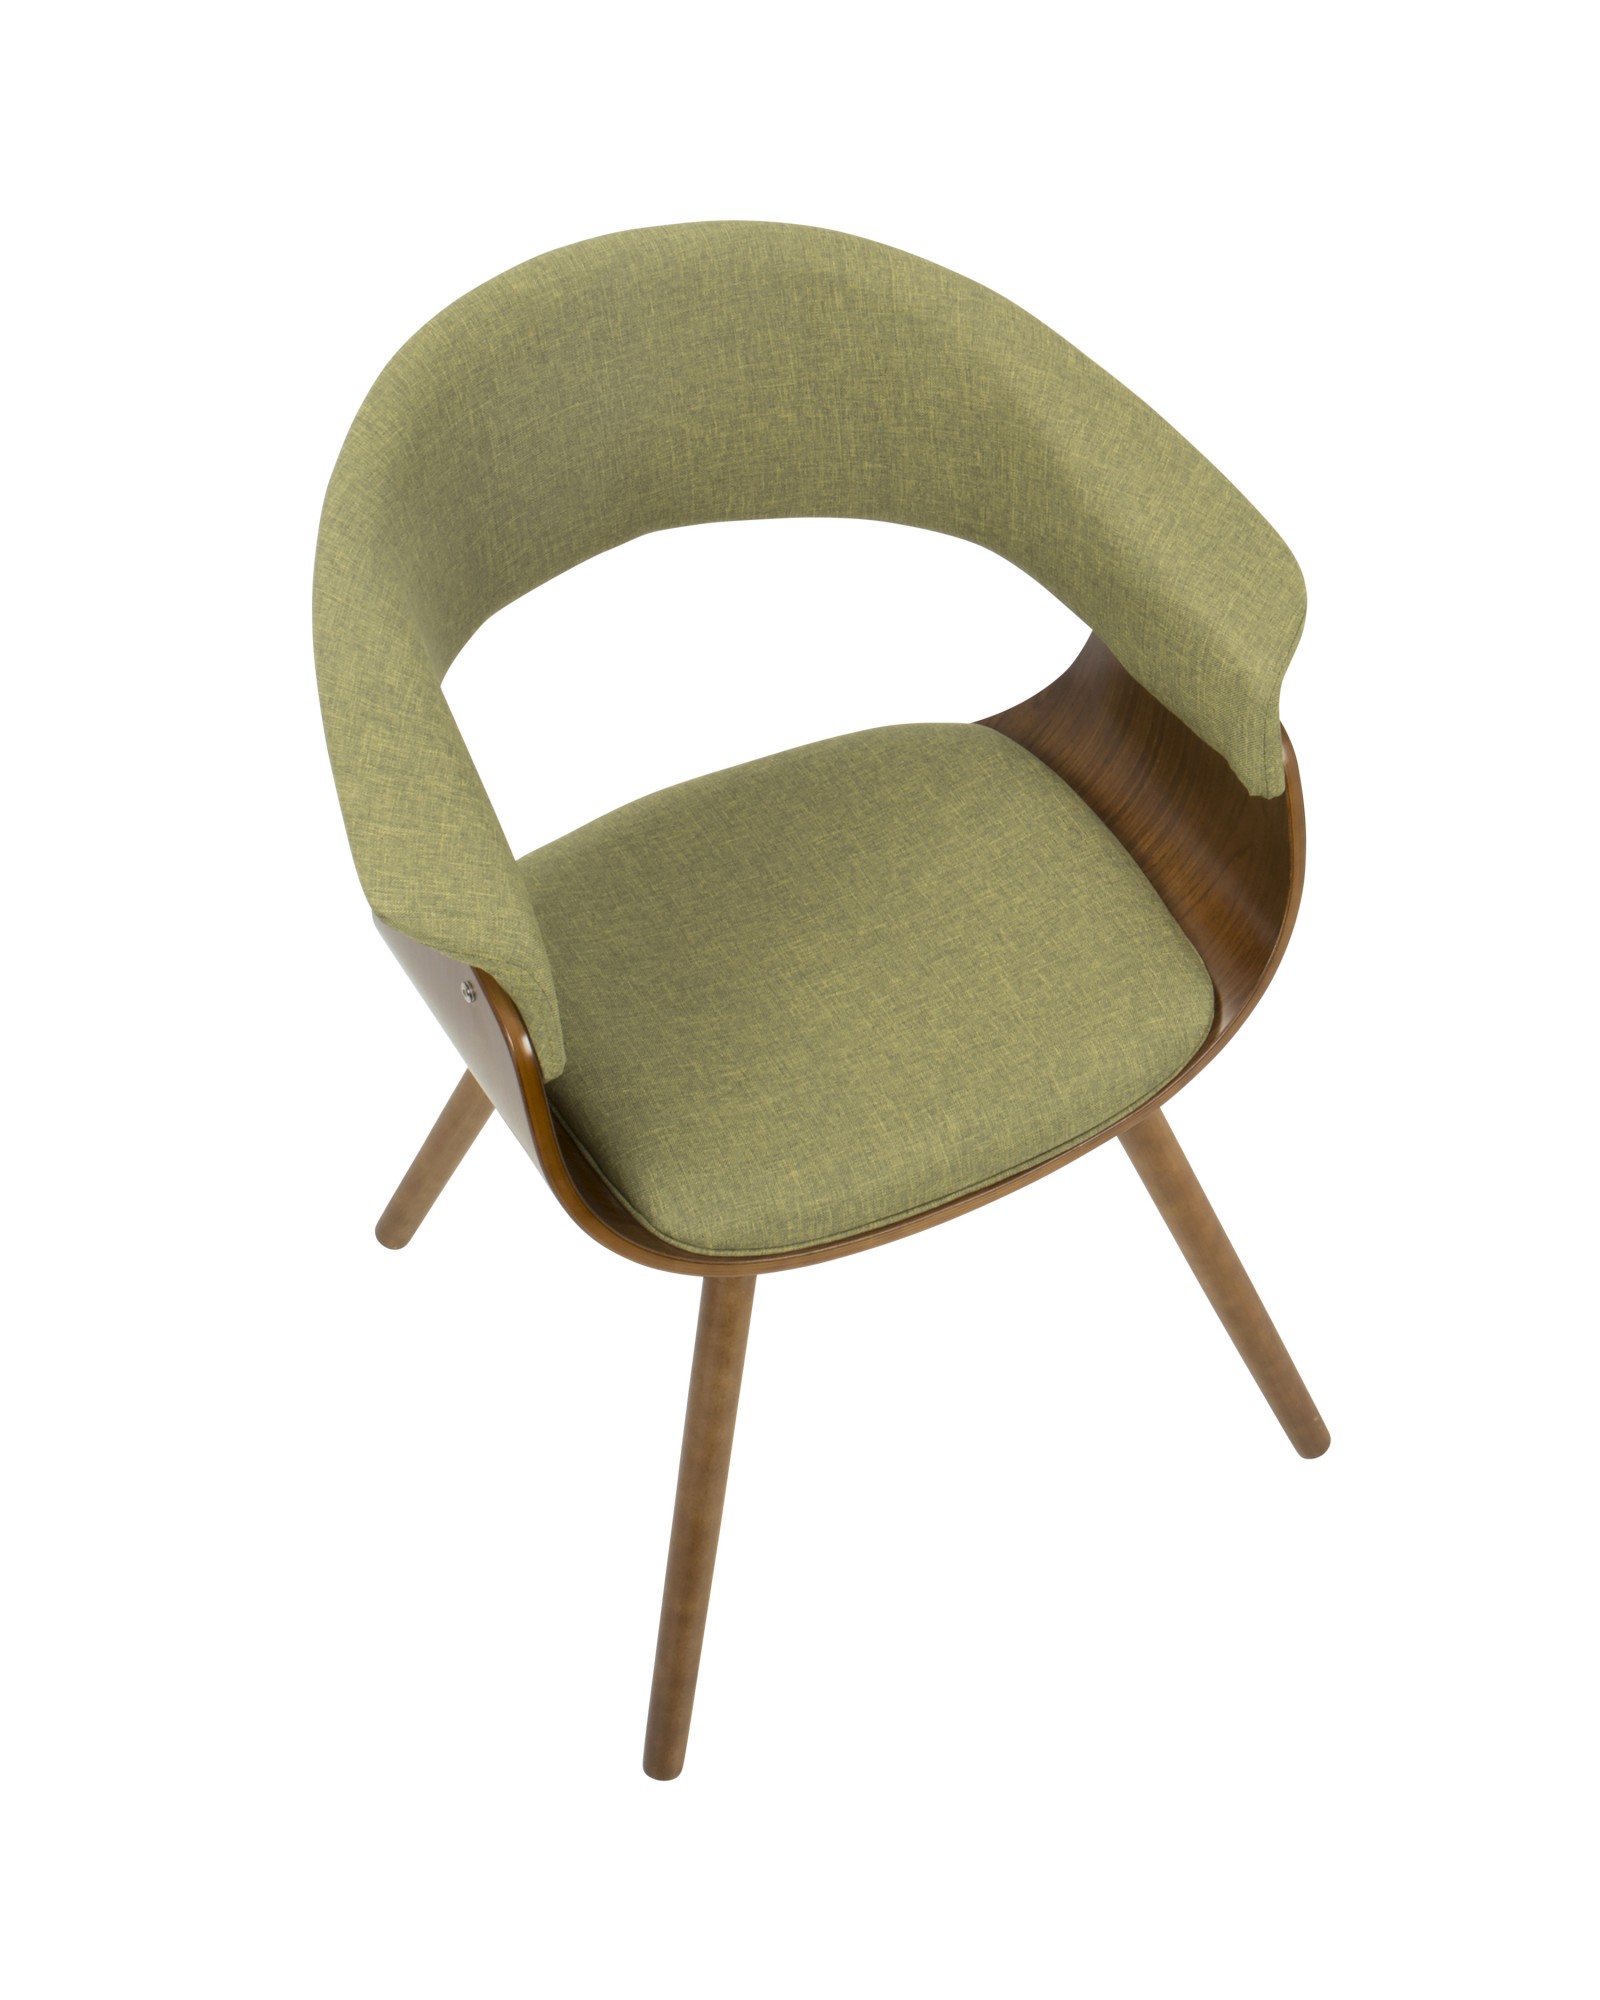 Vintage Mod Mid-Century Modern Chair in Walnut and Green Fabric